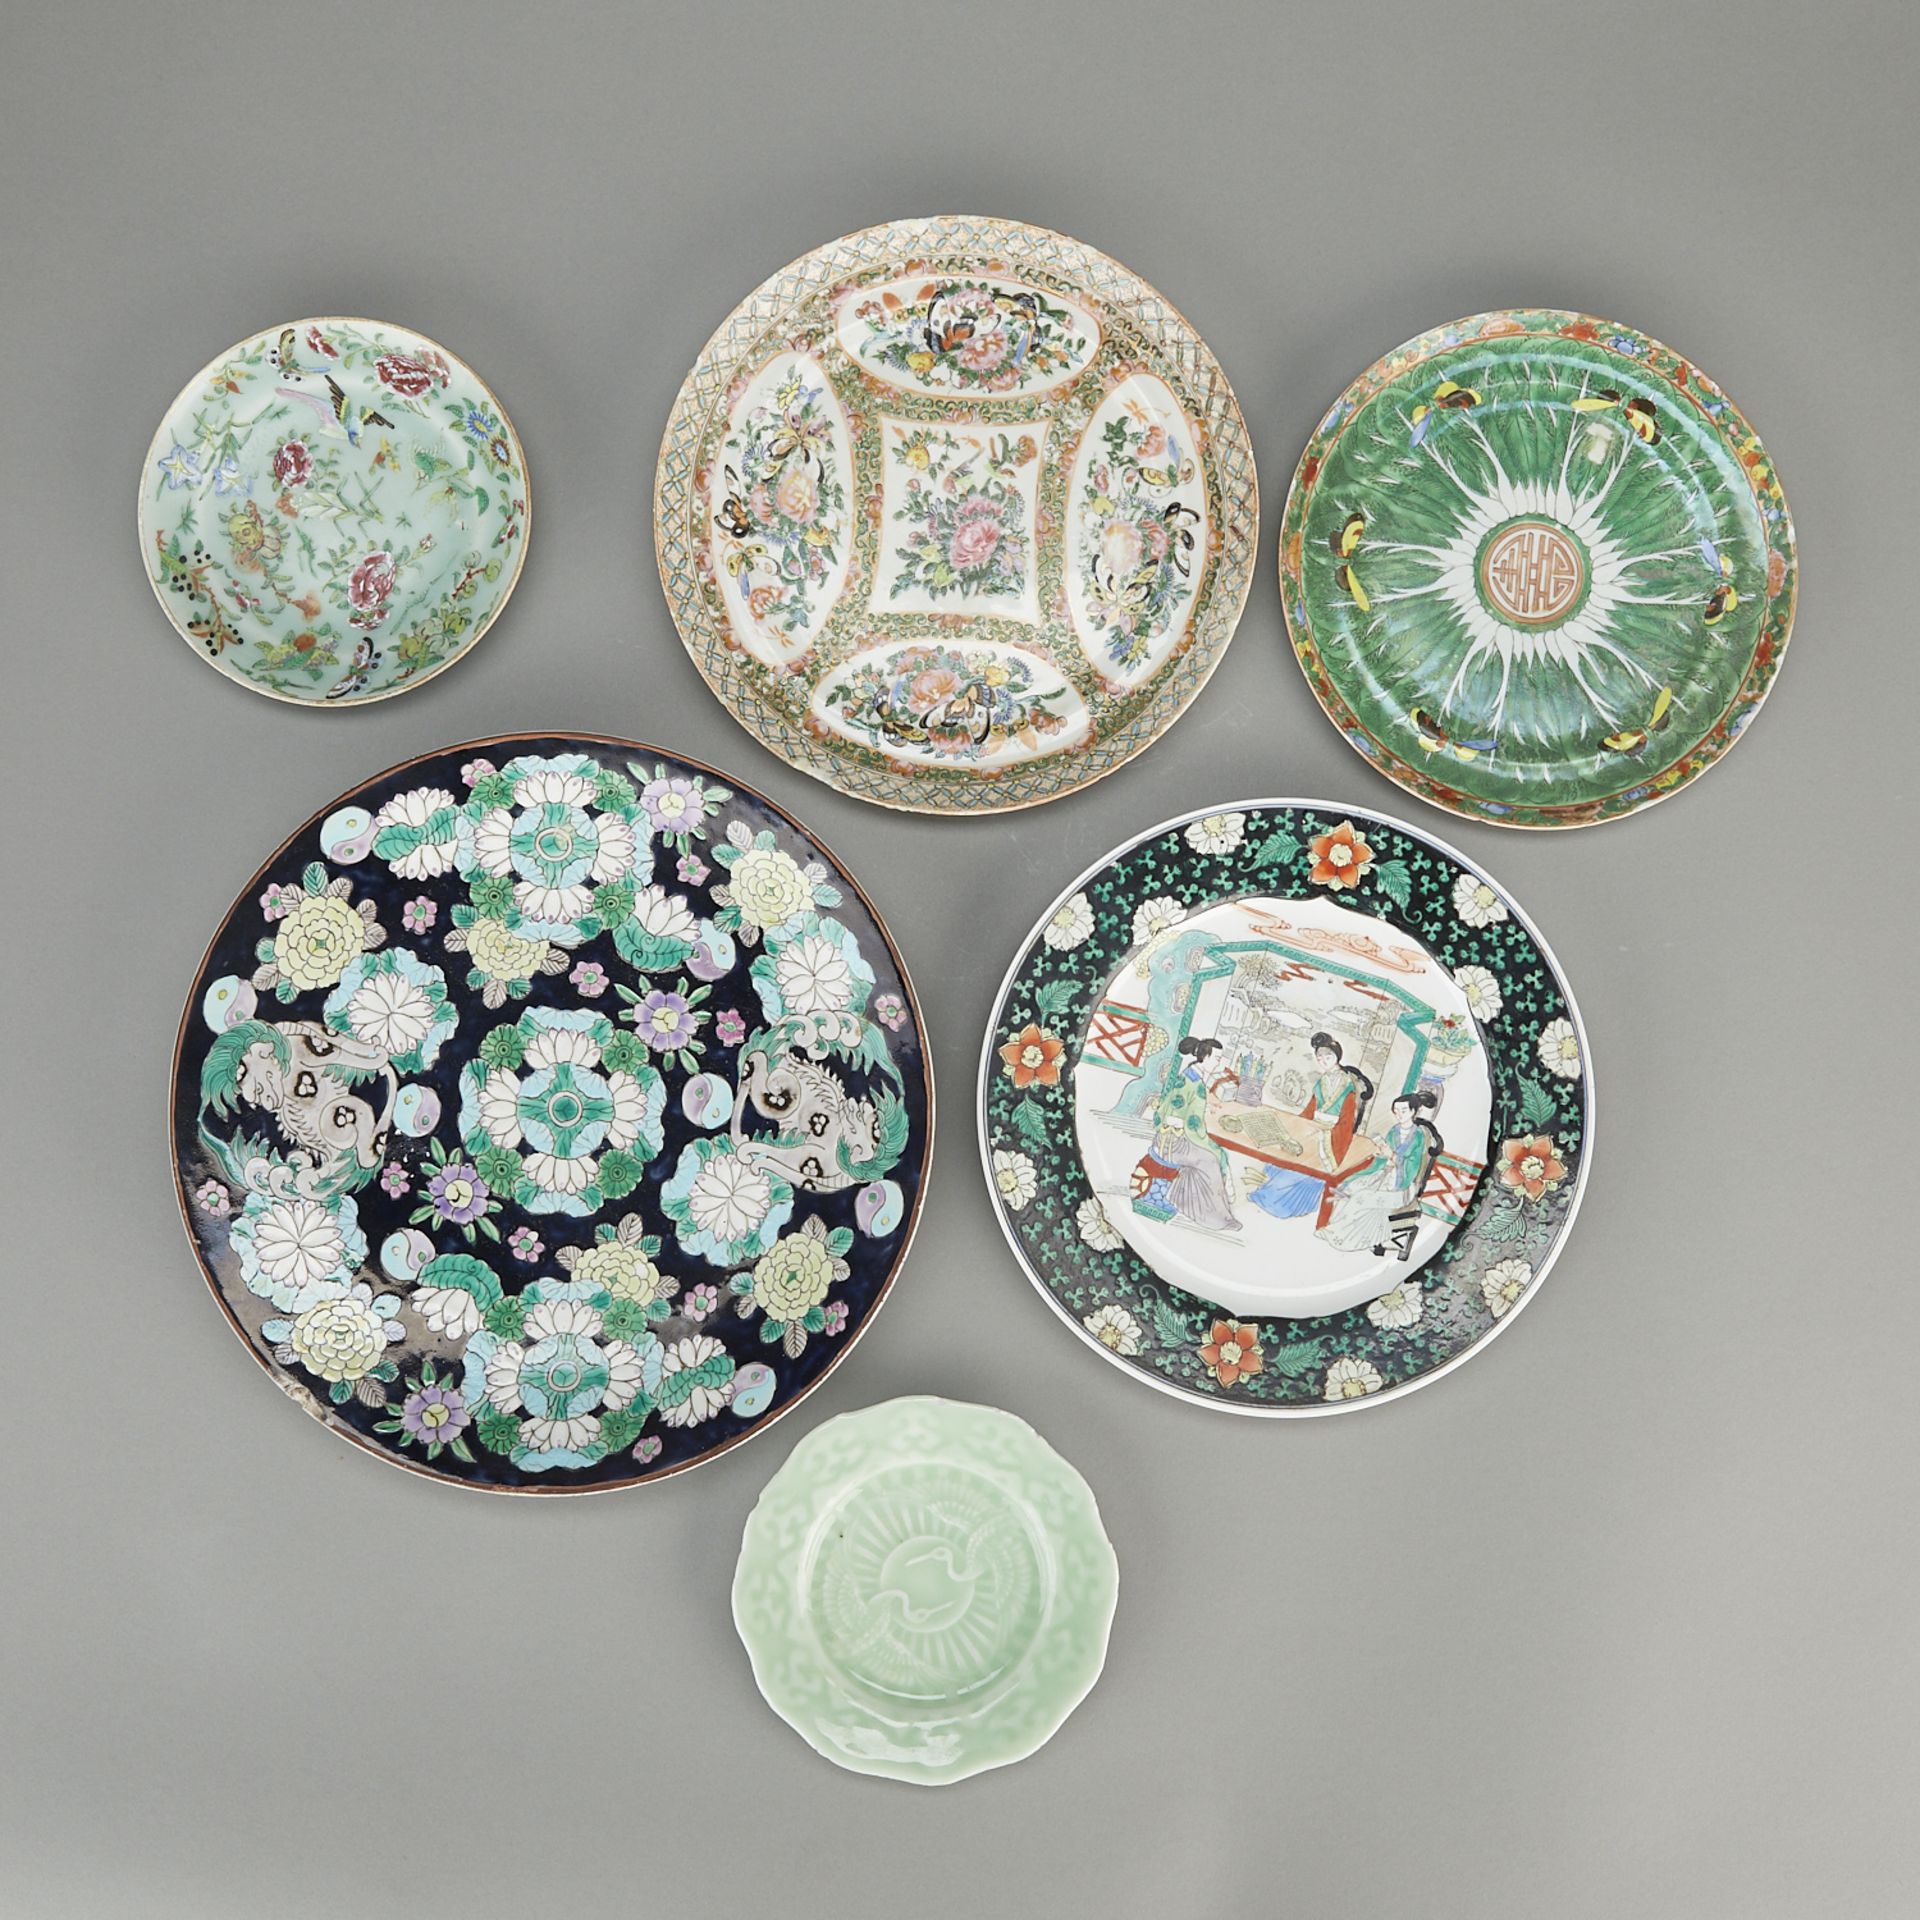 8 Antique Chinese Porcelain Plates and Bowls - Image 2 of 23